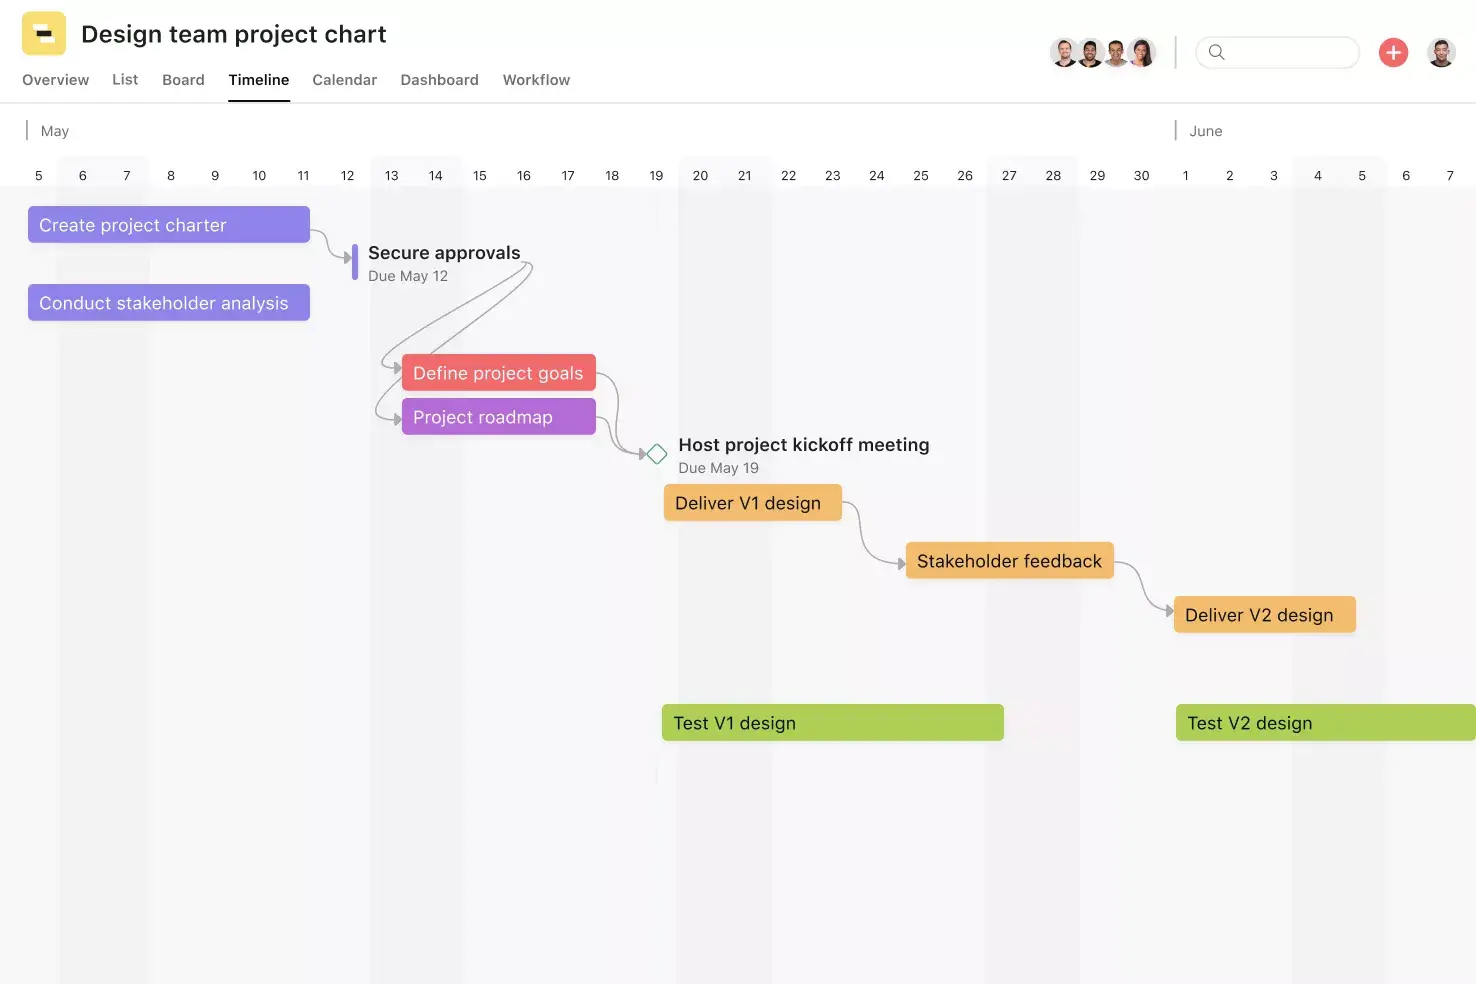 [Product ui] Project chart in Asana (Timeline)